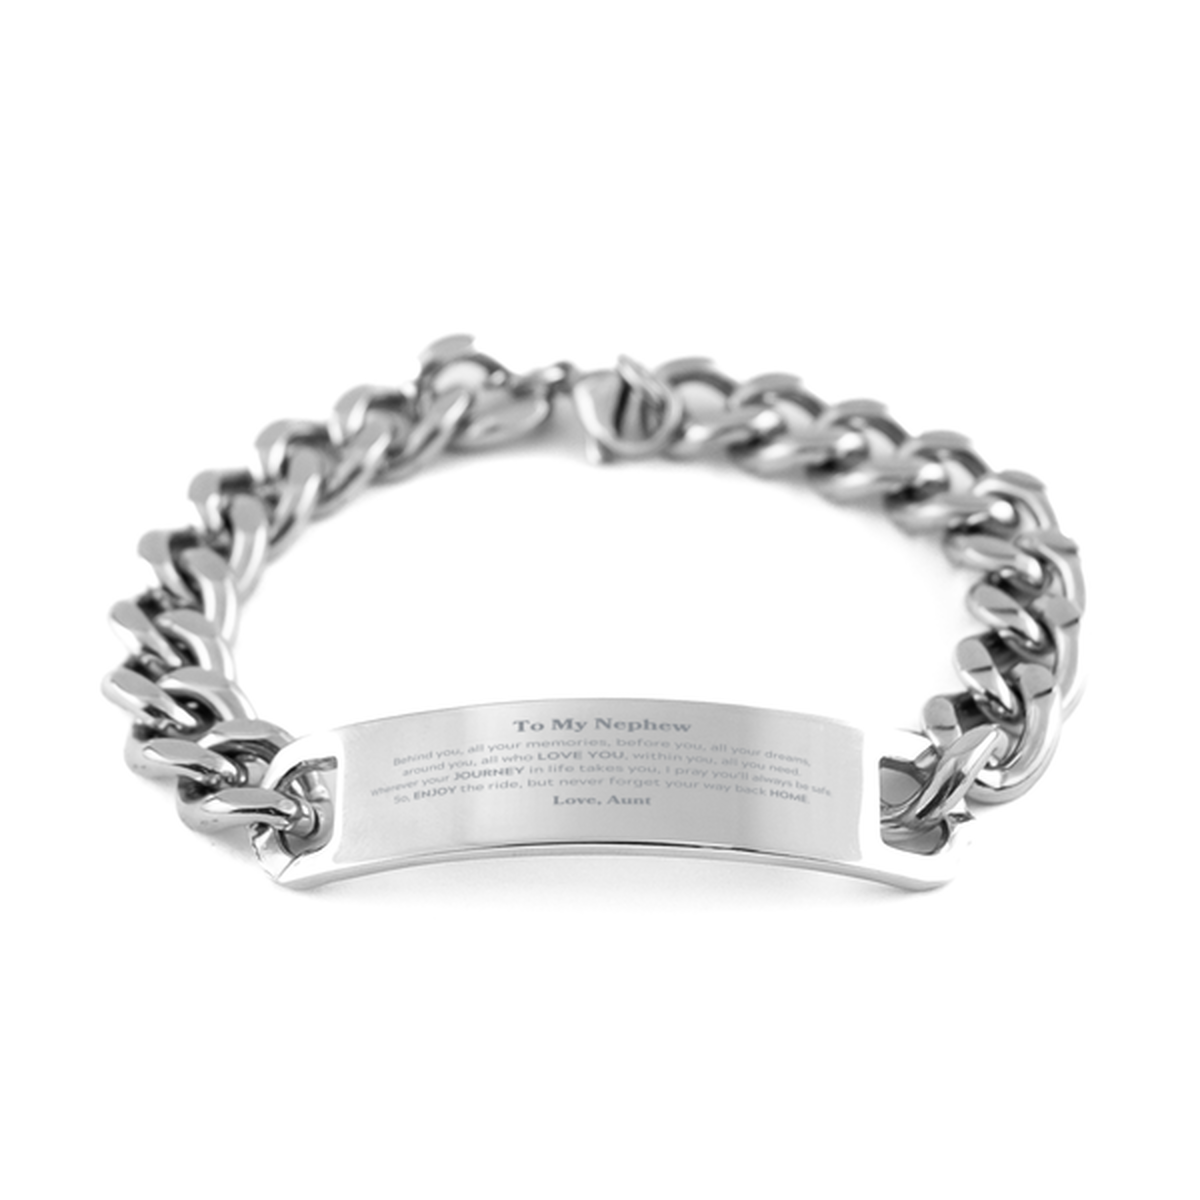 To My Nephew Graduation Gifts from Aunt, Nephew Cuban Chain Stainless Steel Bracelet Christmas Birthday Gifts for Nephew Behind you, all your memories, before you, all your dreams. Love, Aunt